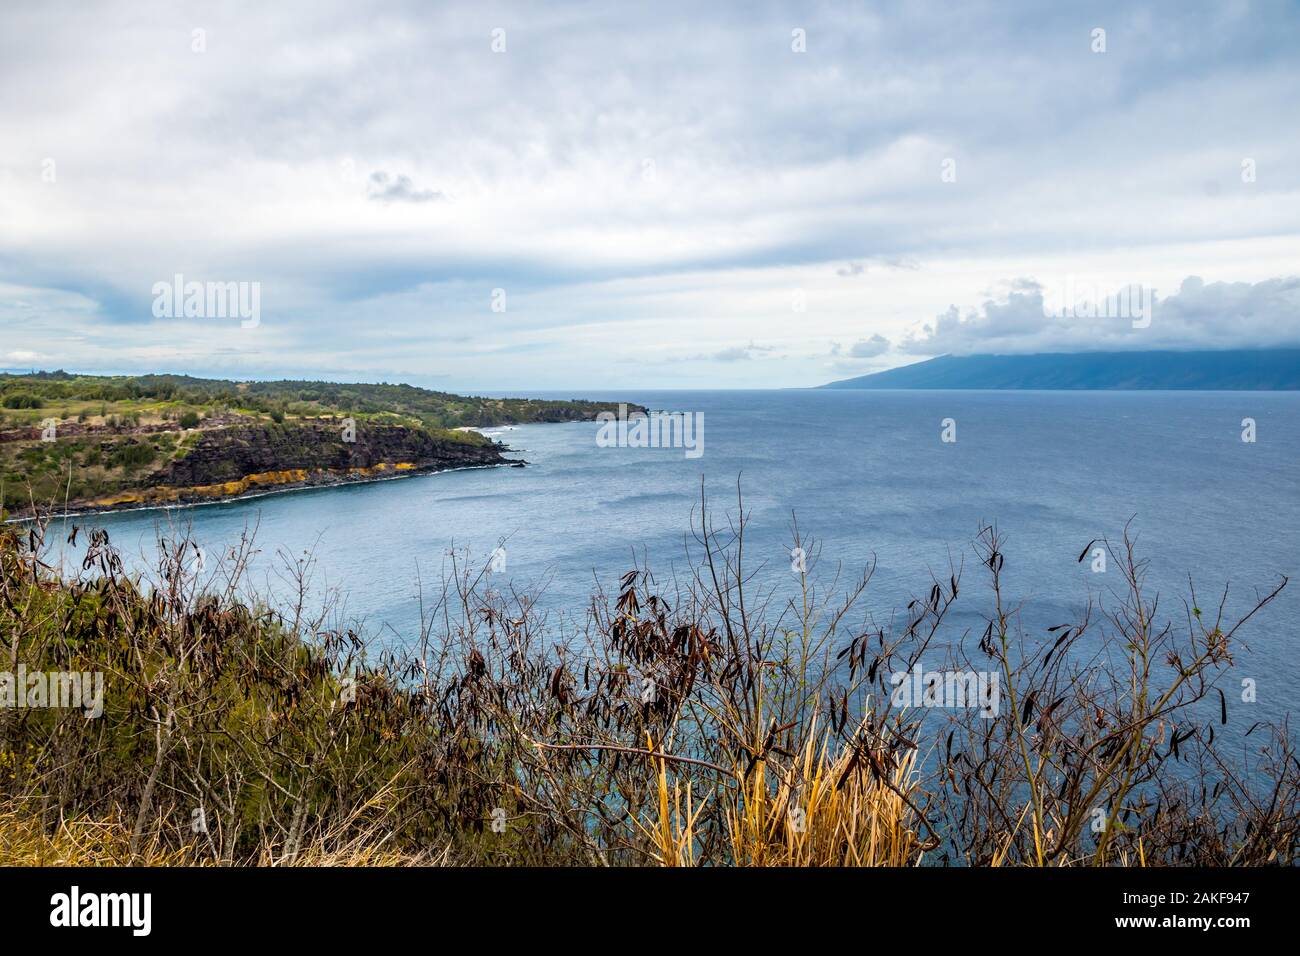 A gorgeous view of the natural landscape in Maui, Hawaii Stock Photo